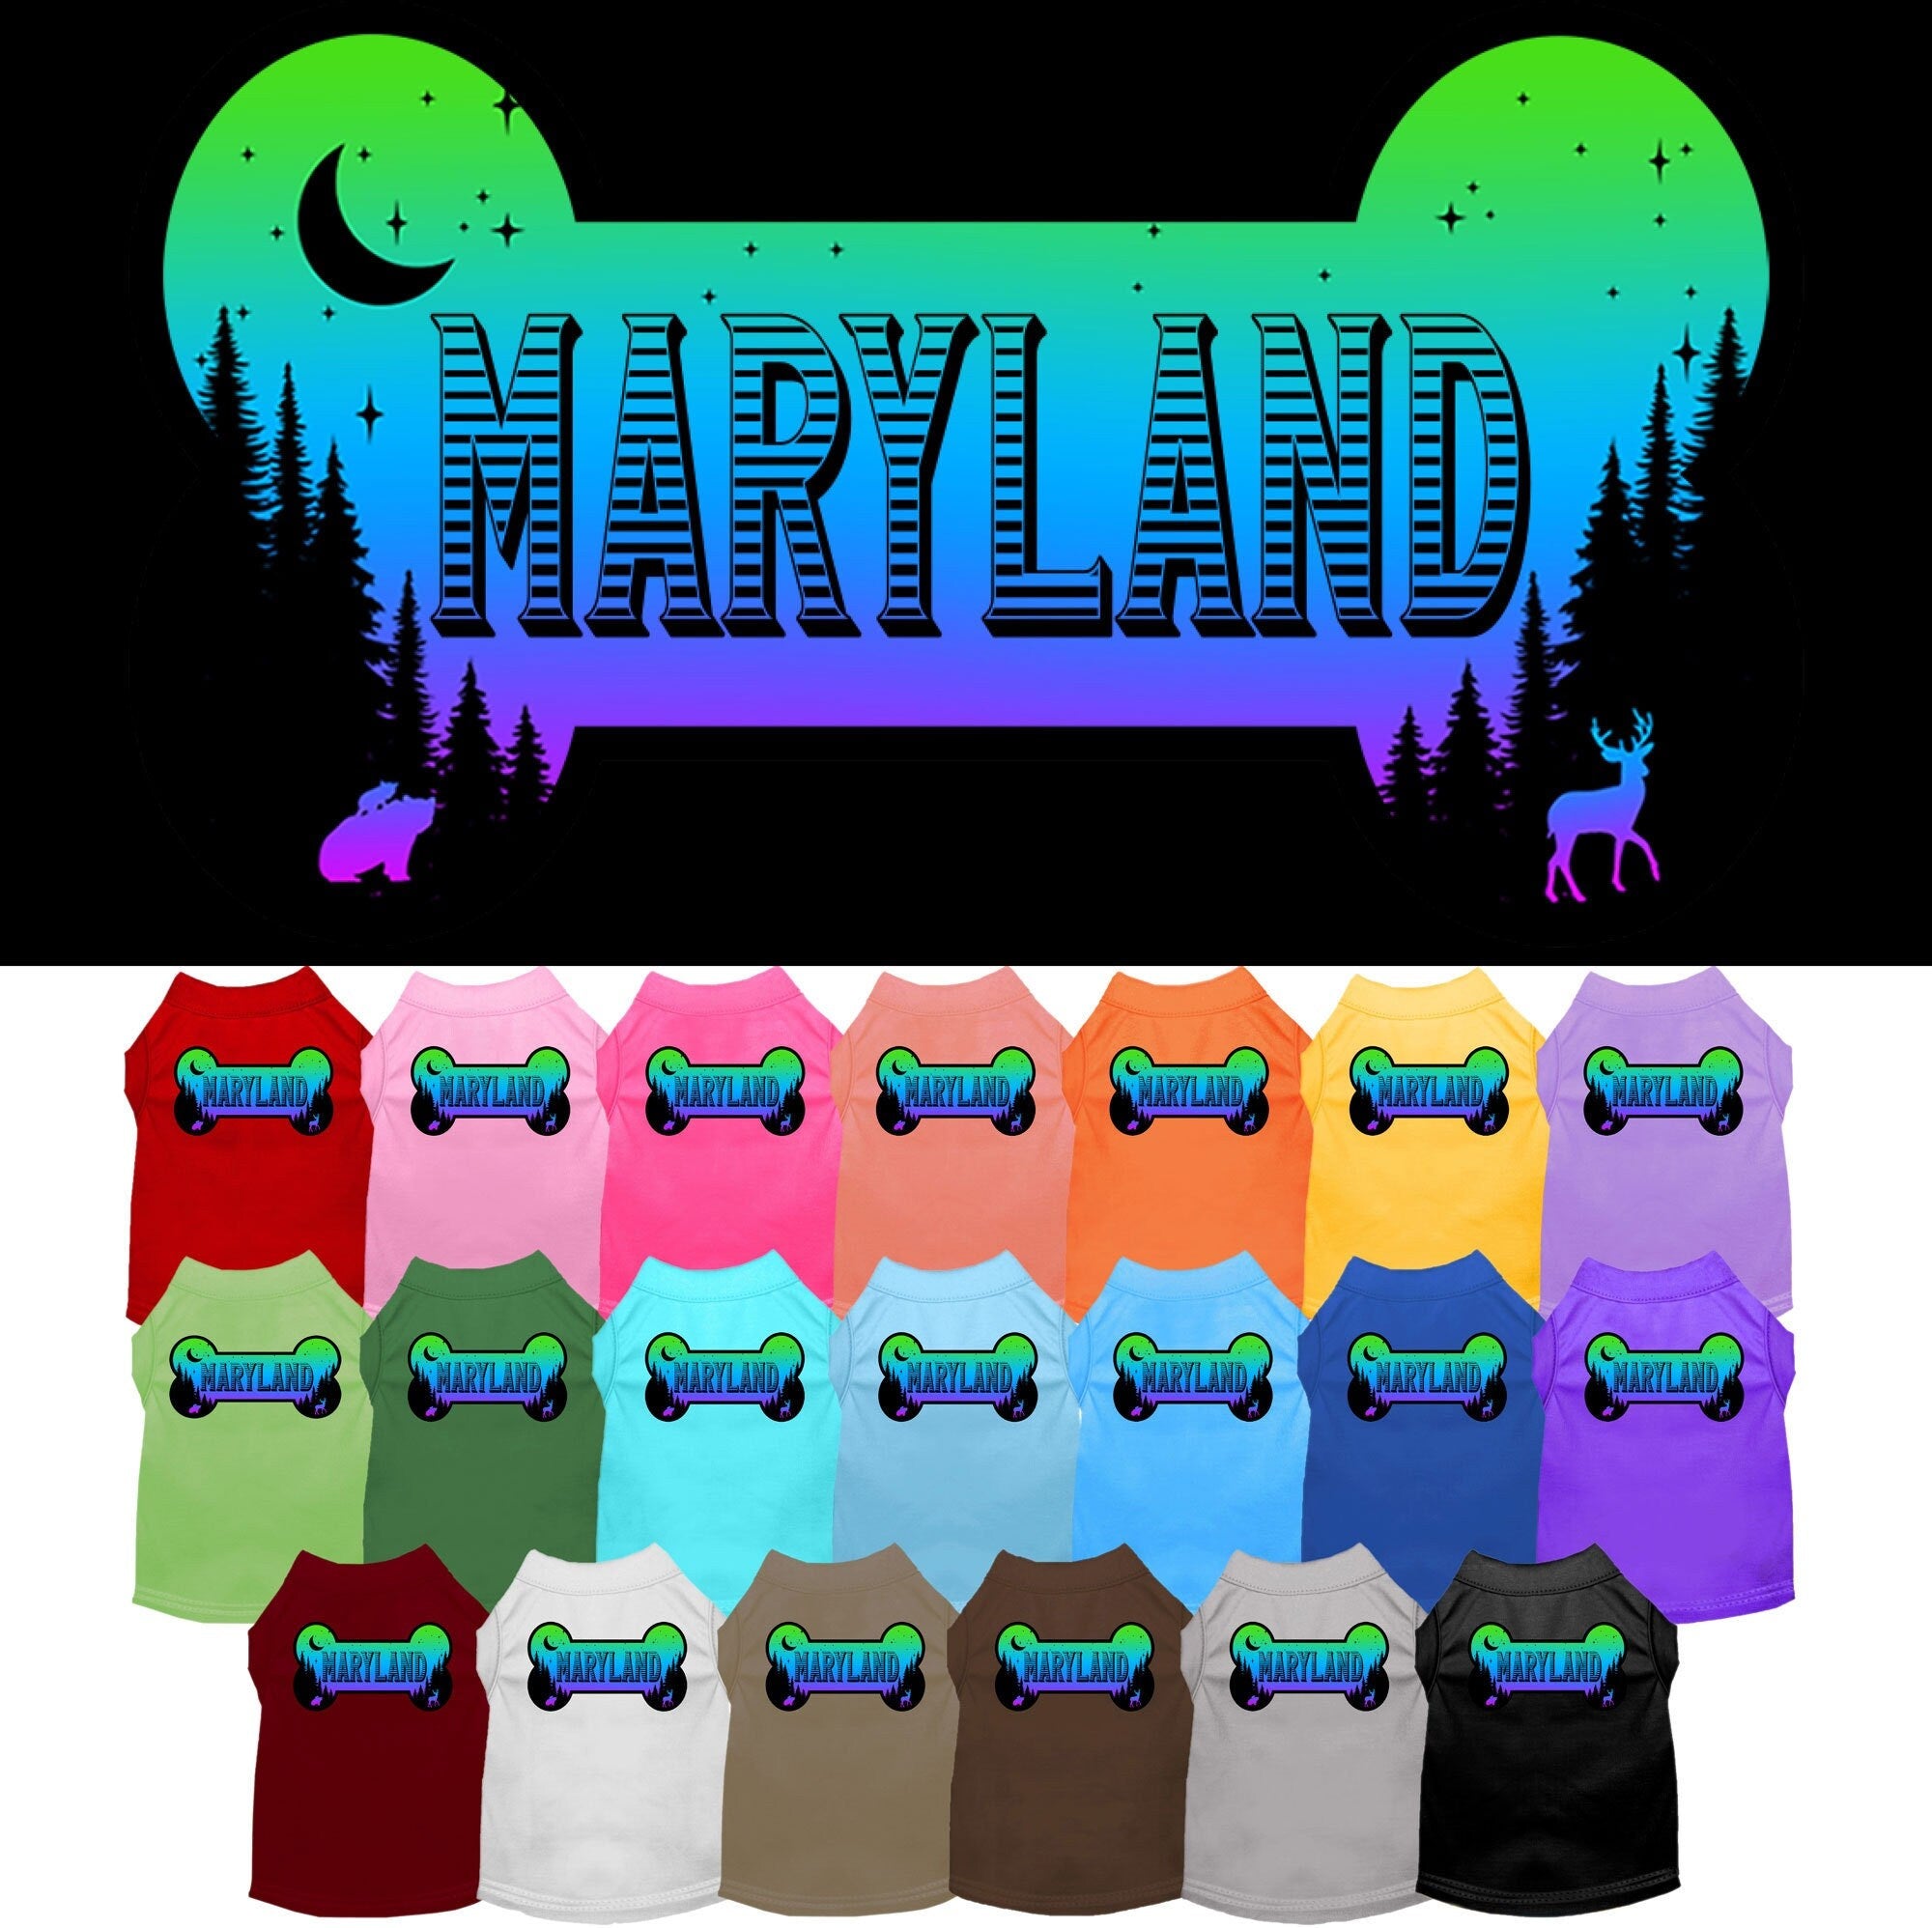 Pet Dog & Cat Screen Printed Shirt for Small to Medium Pets (Sizes XS-XL), "Maryland Mountain Shades"